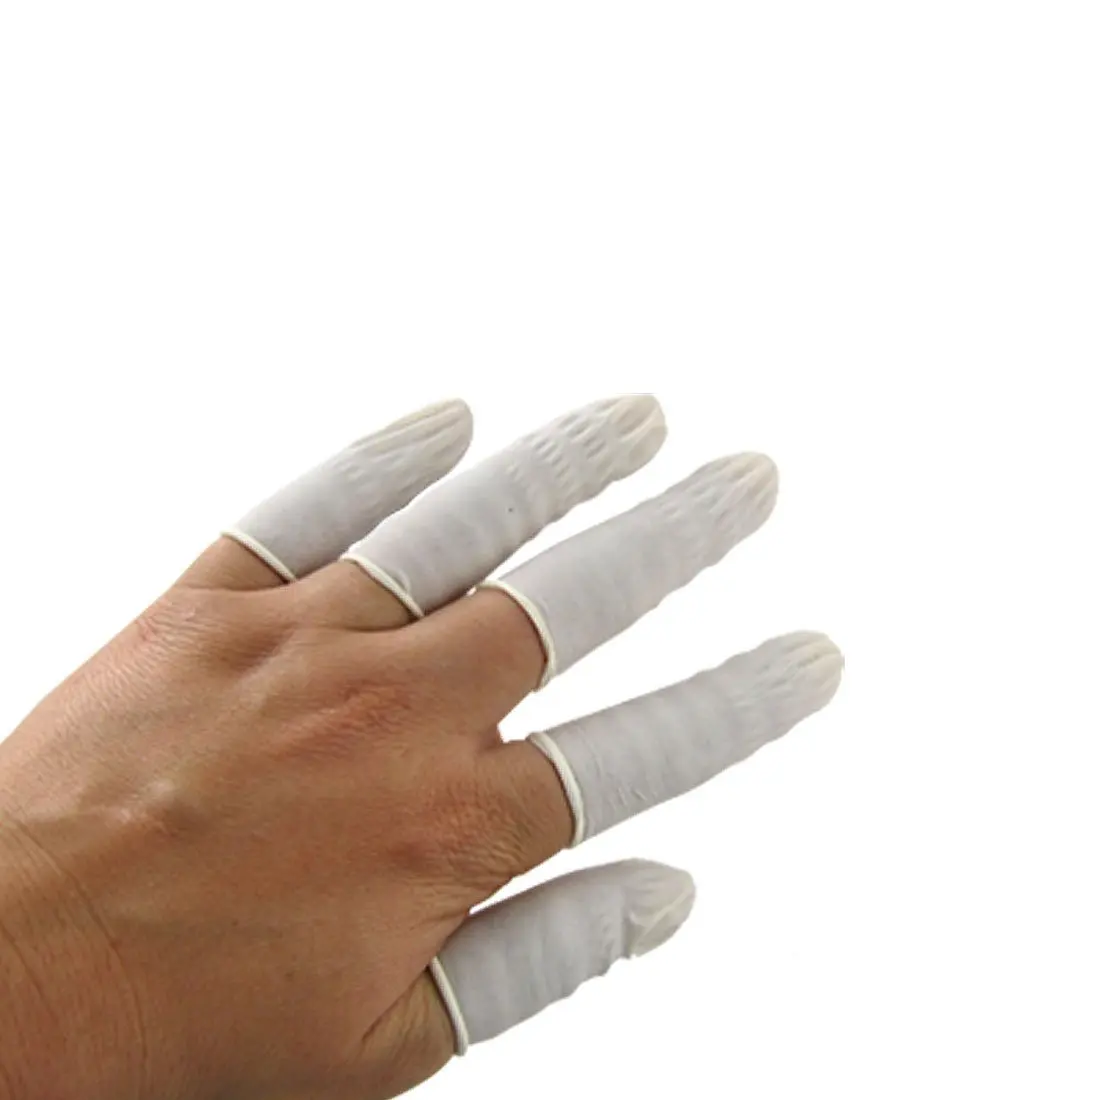 14.27. uxcell Latex Fingertips Protective Small Rubber Gloves Finger Cots 6...